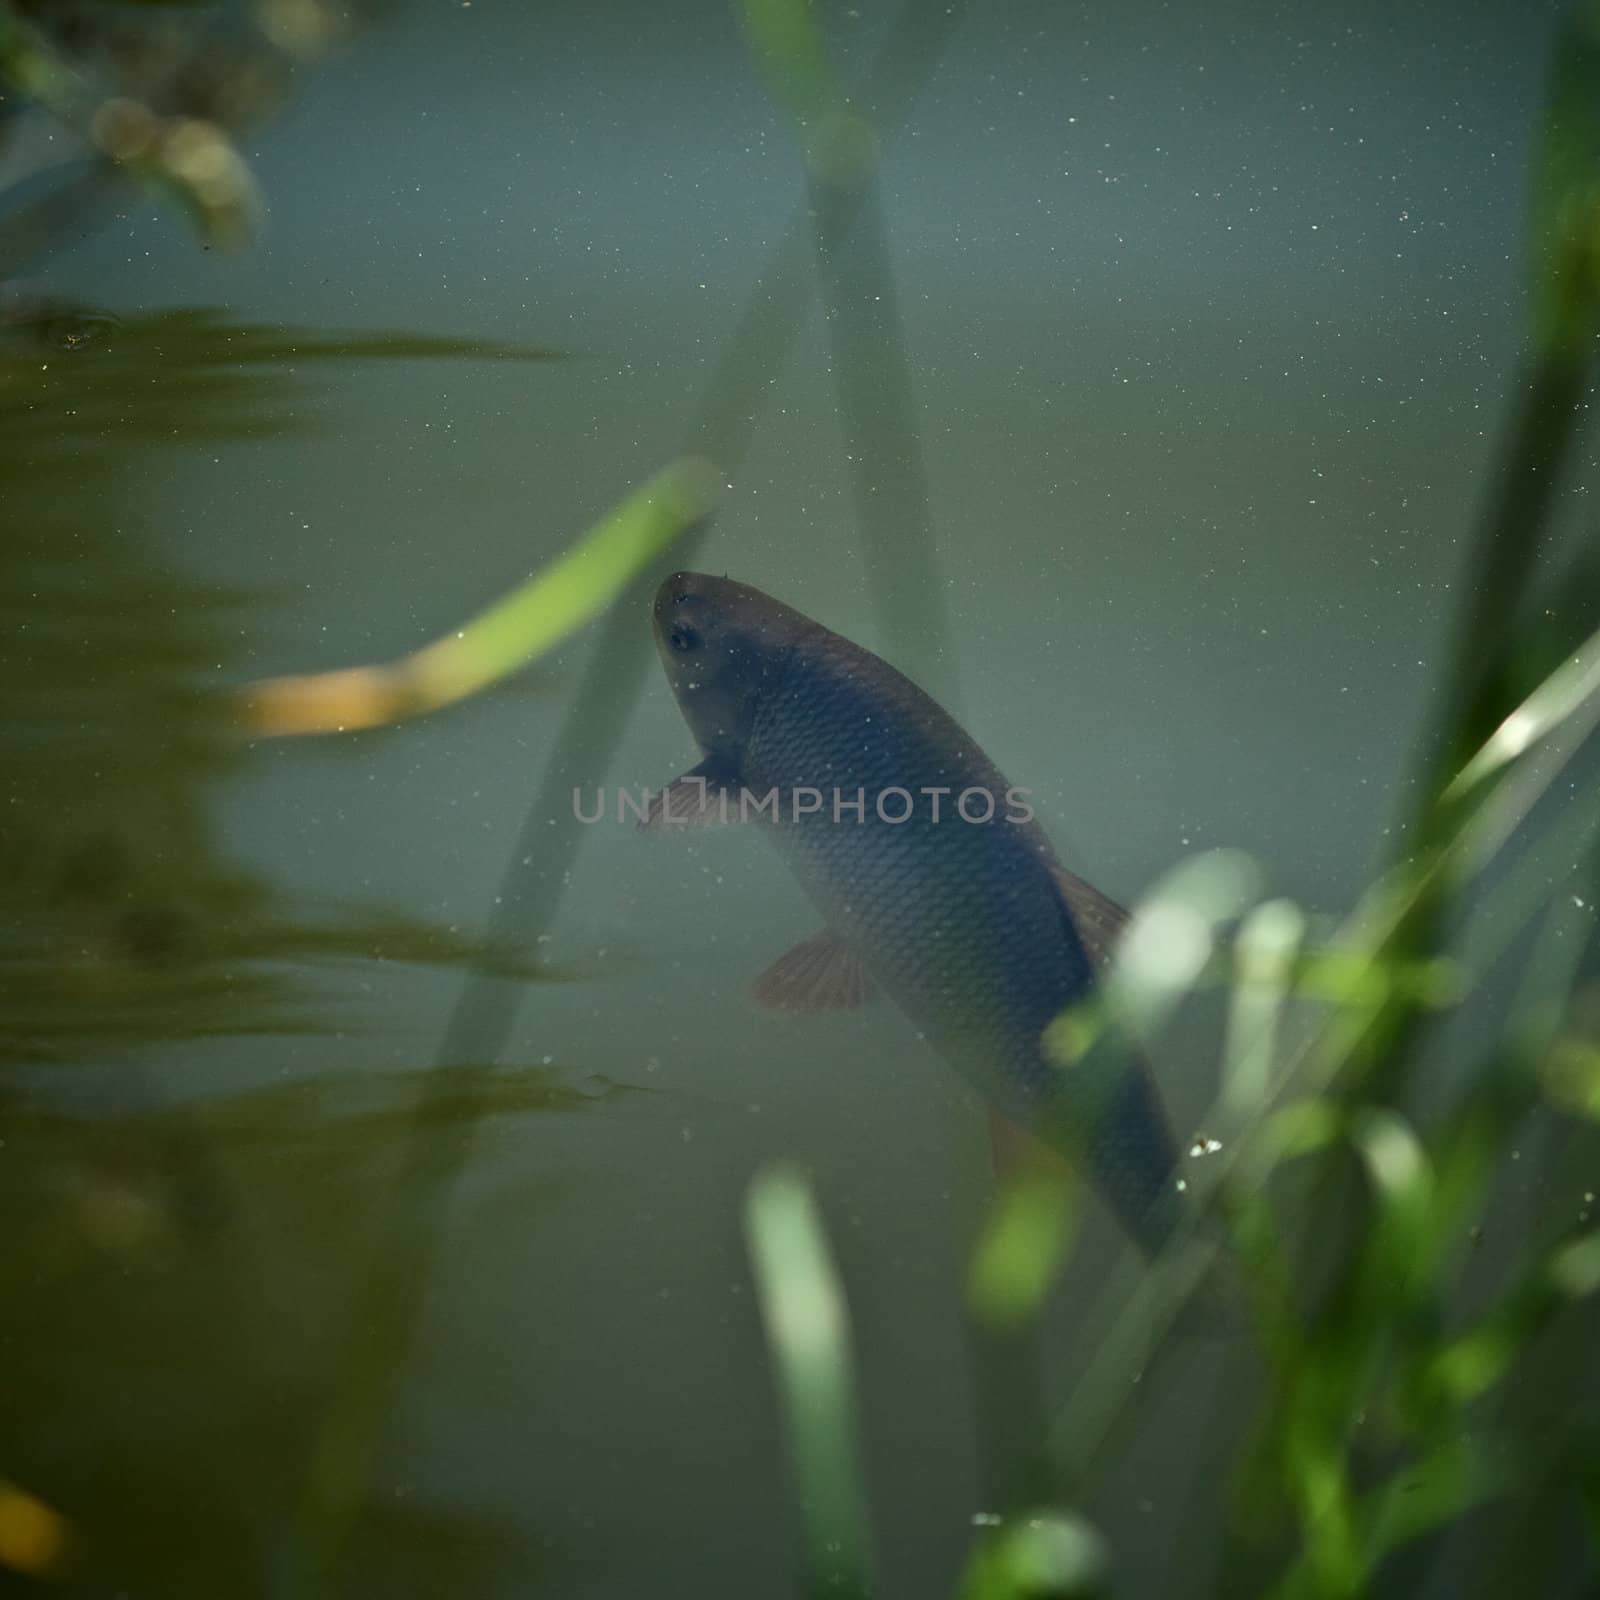 carp fish in water of small pond